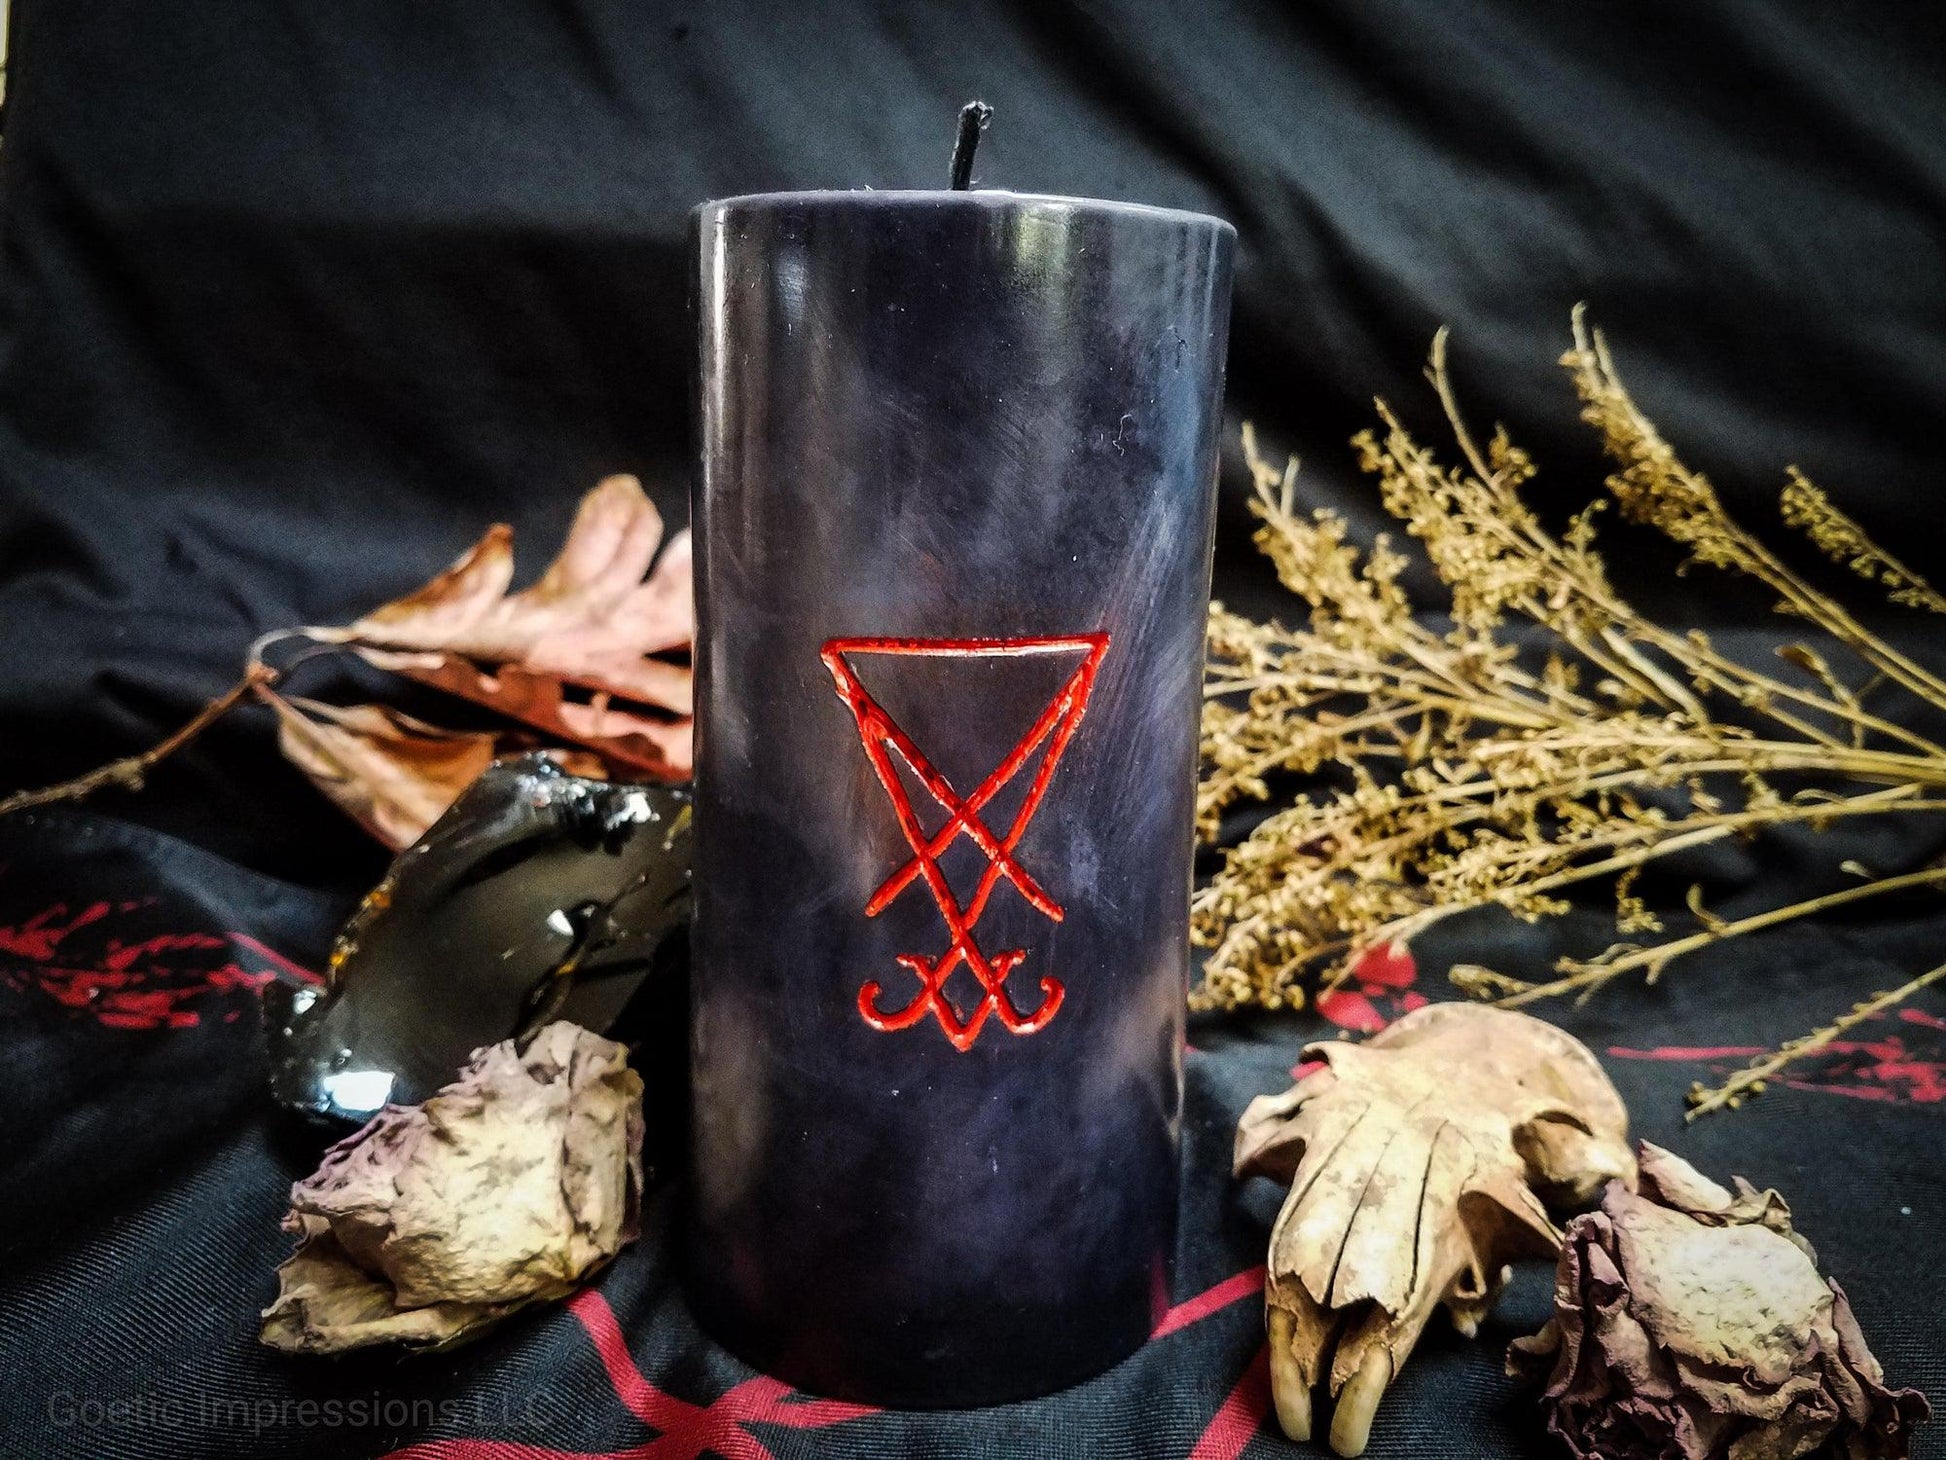 Black pillar candle with Sigil of Lucifer carved into it in red